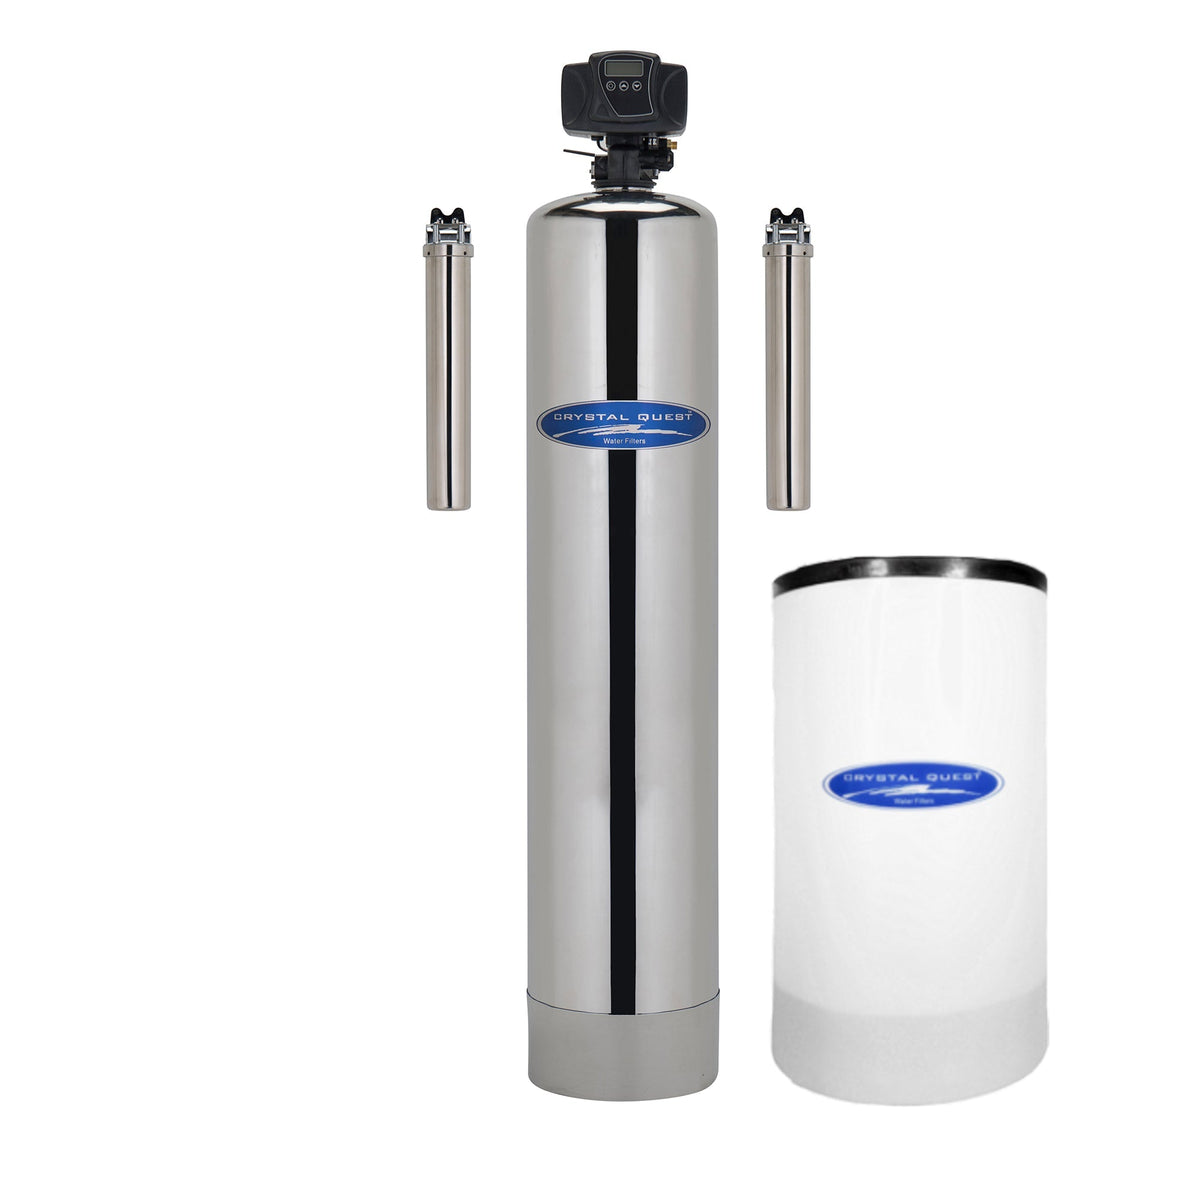 Stainless Steel / 1.5 Whole House Water Softener with Pre/Post Filtration - Whole House Water Filters - Crystal Quest